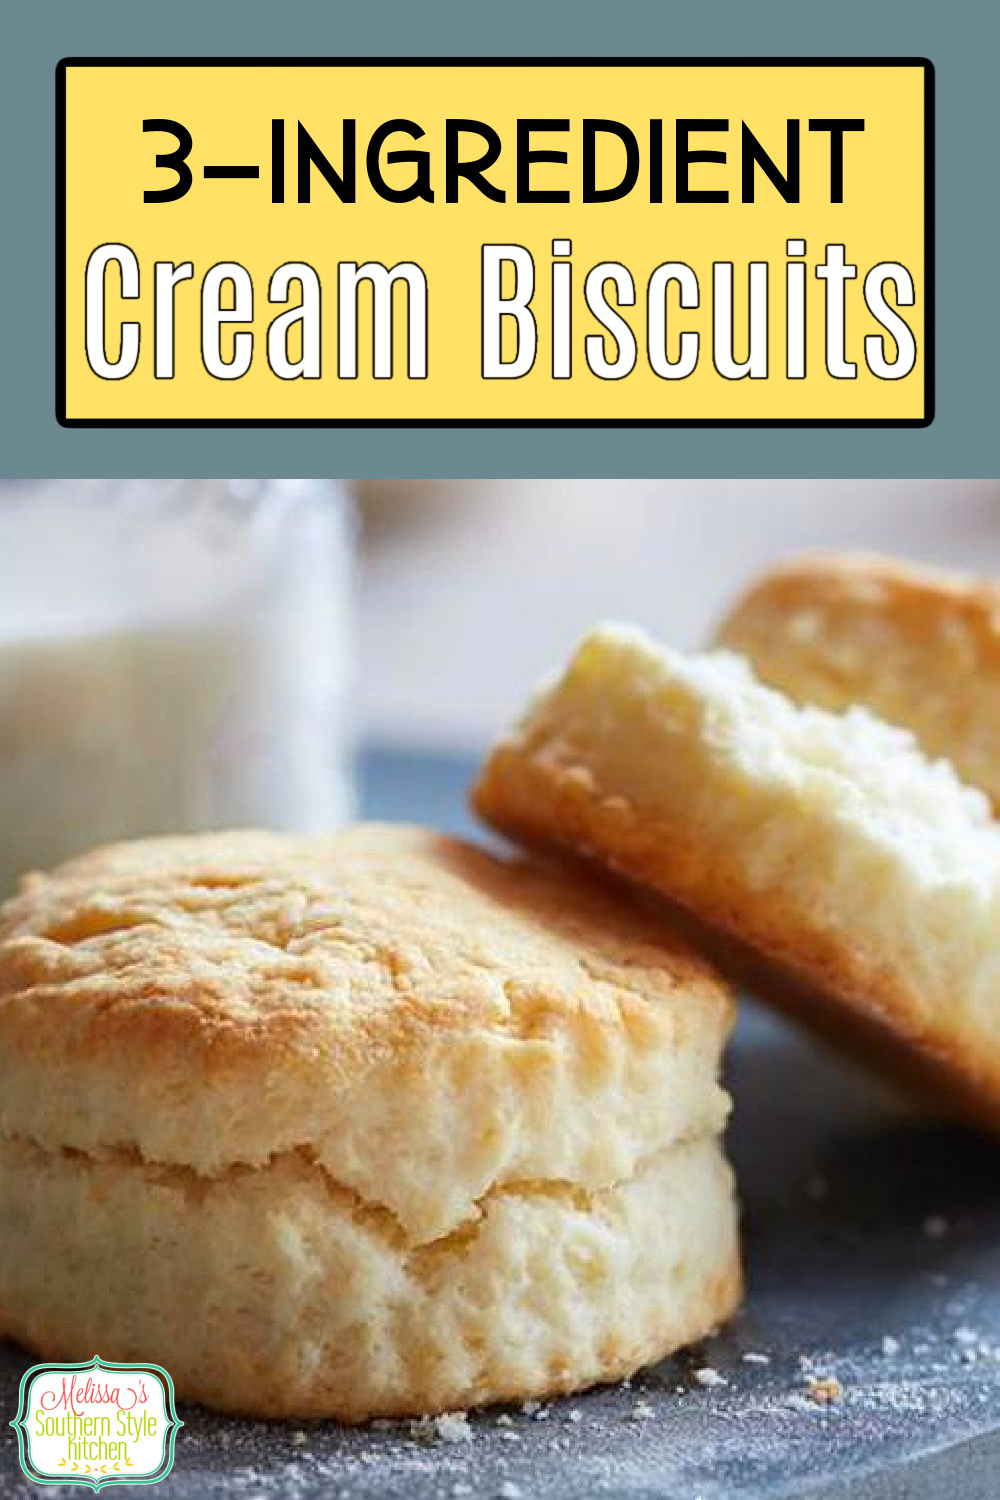 You'll only need three ingredients to make these Easy Cream Biscuits #creambiscuits #southernbiscuits #biscuits #southernrecipes #easybiscuits #easybiscuitrecipes via @melissasssk